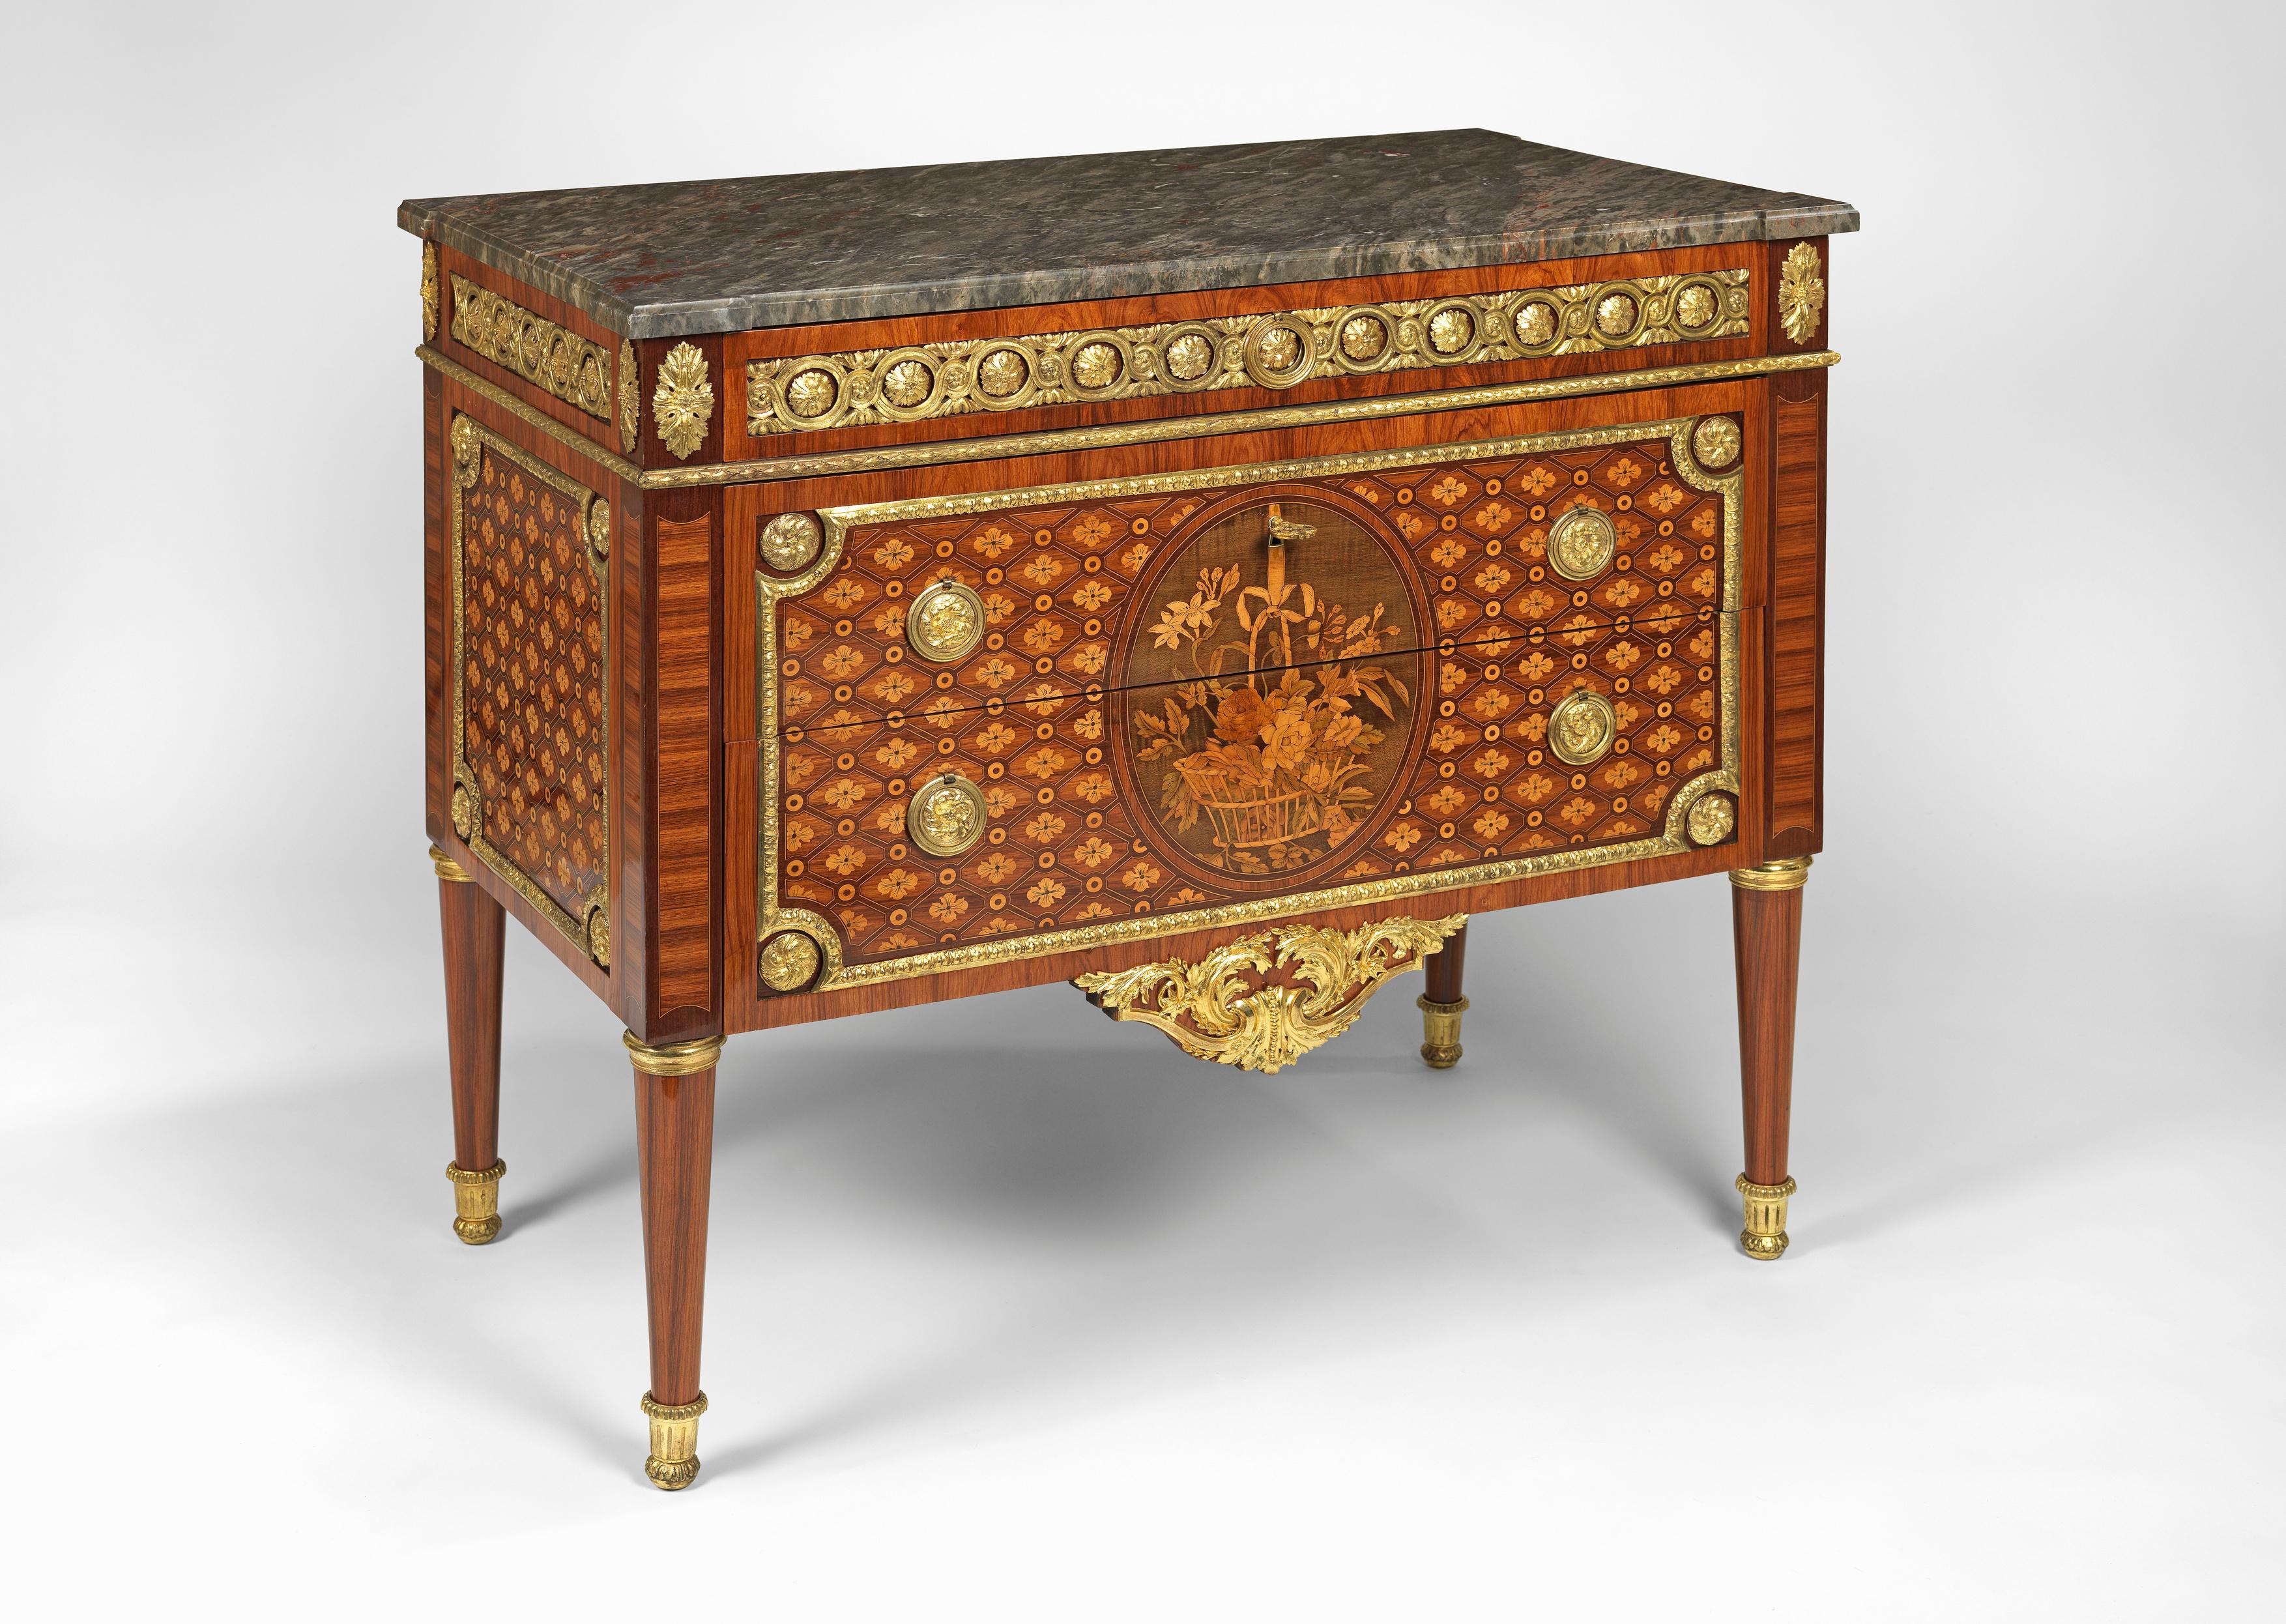 The commode having three drawers, the first set in the frieze, mounted with panels of ormolu interlace and rosettes above the remaining two drawers. These doors are inlaid with flower heads and interlacing within a geometrical pattern and set within